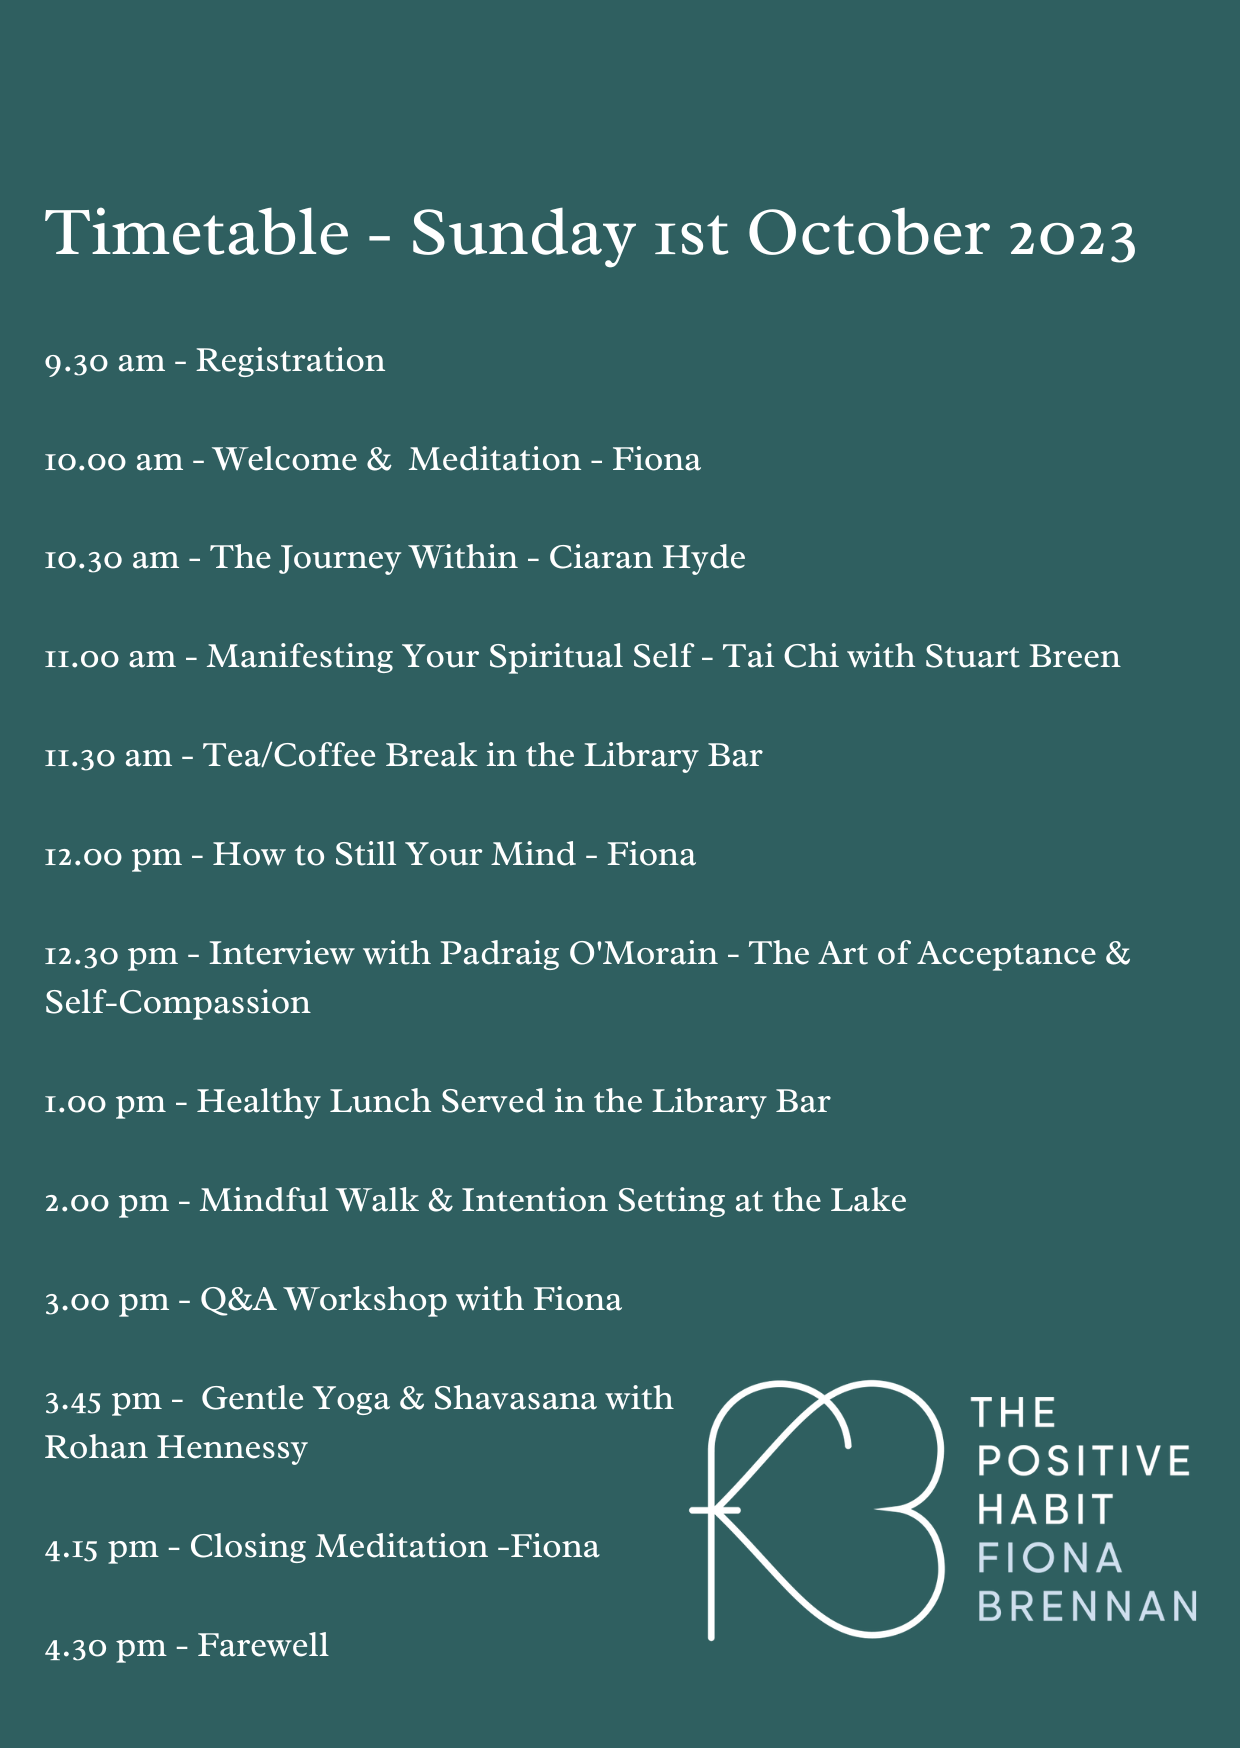 Timetable - The Power of Presence 1st Oct 2023